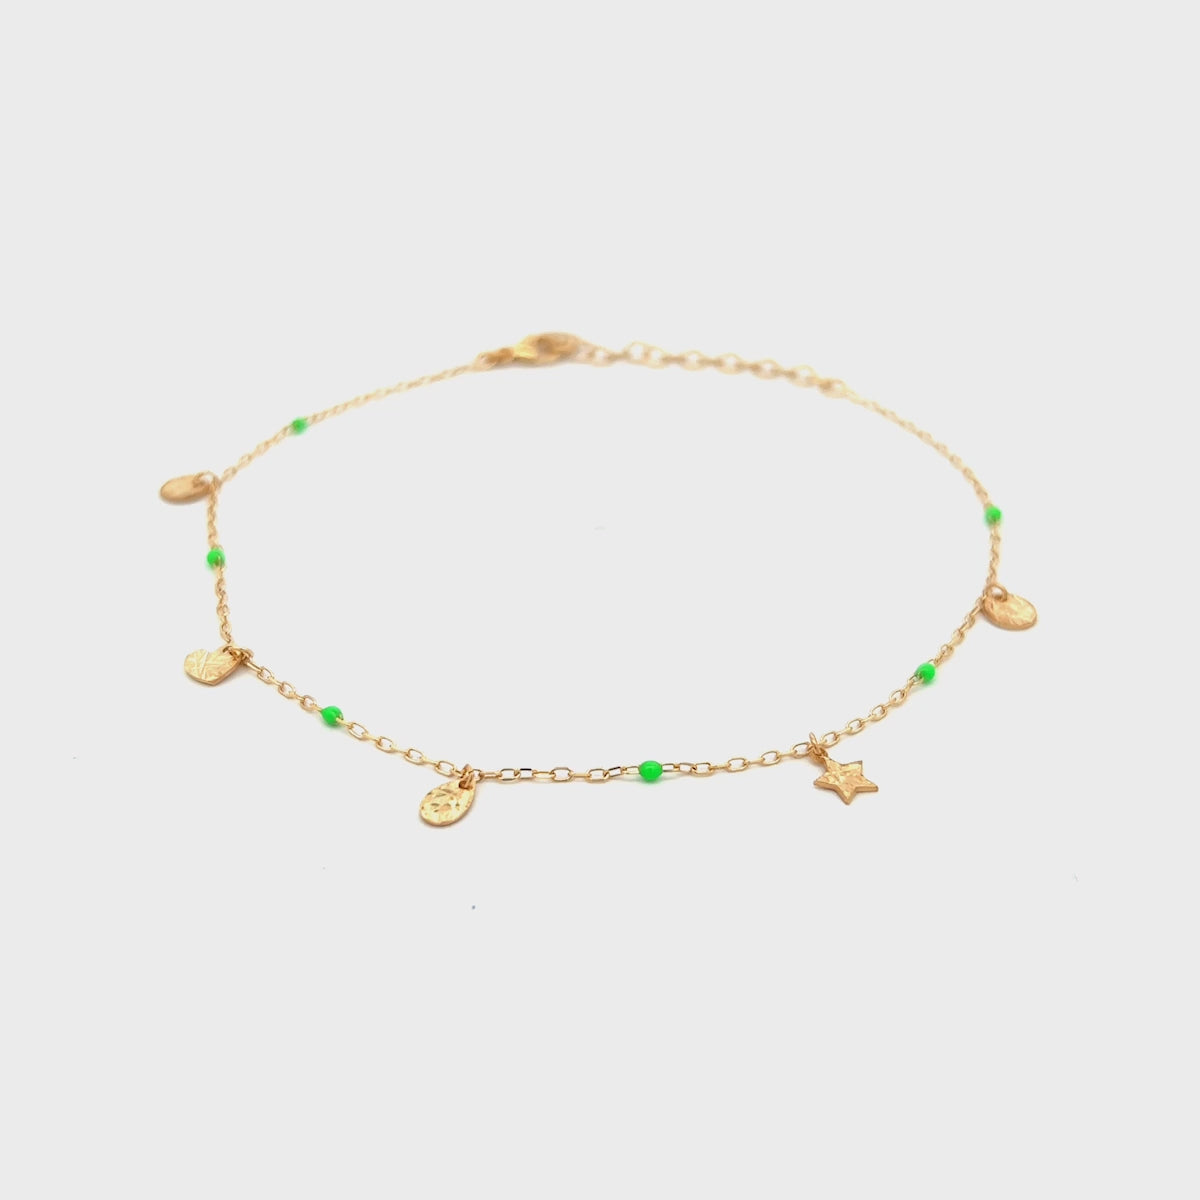 Anklets - Anklet charms and green enamel detail - Anklets Mania - thumbnail - video - 1 | Rue des Mille